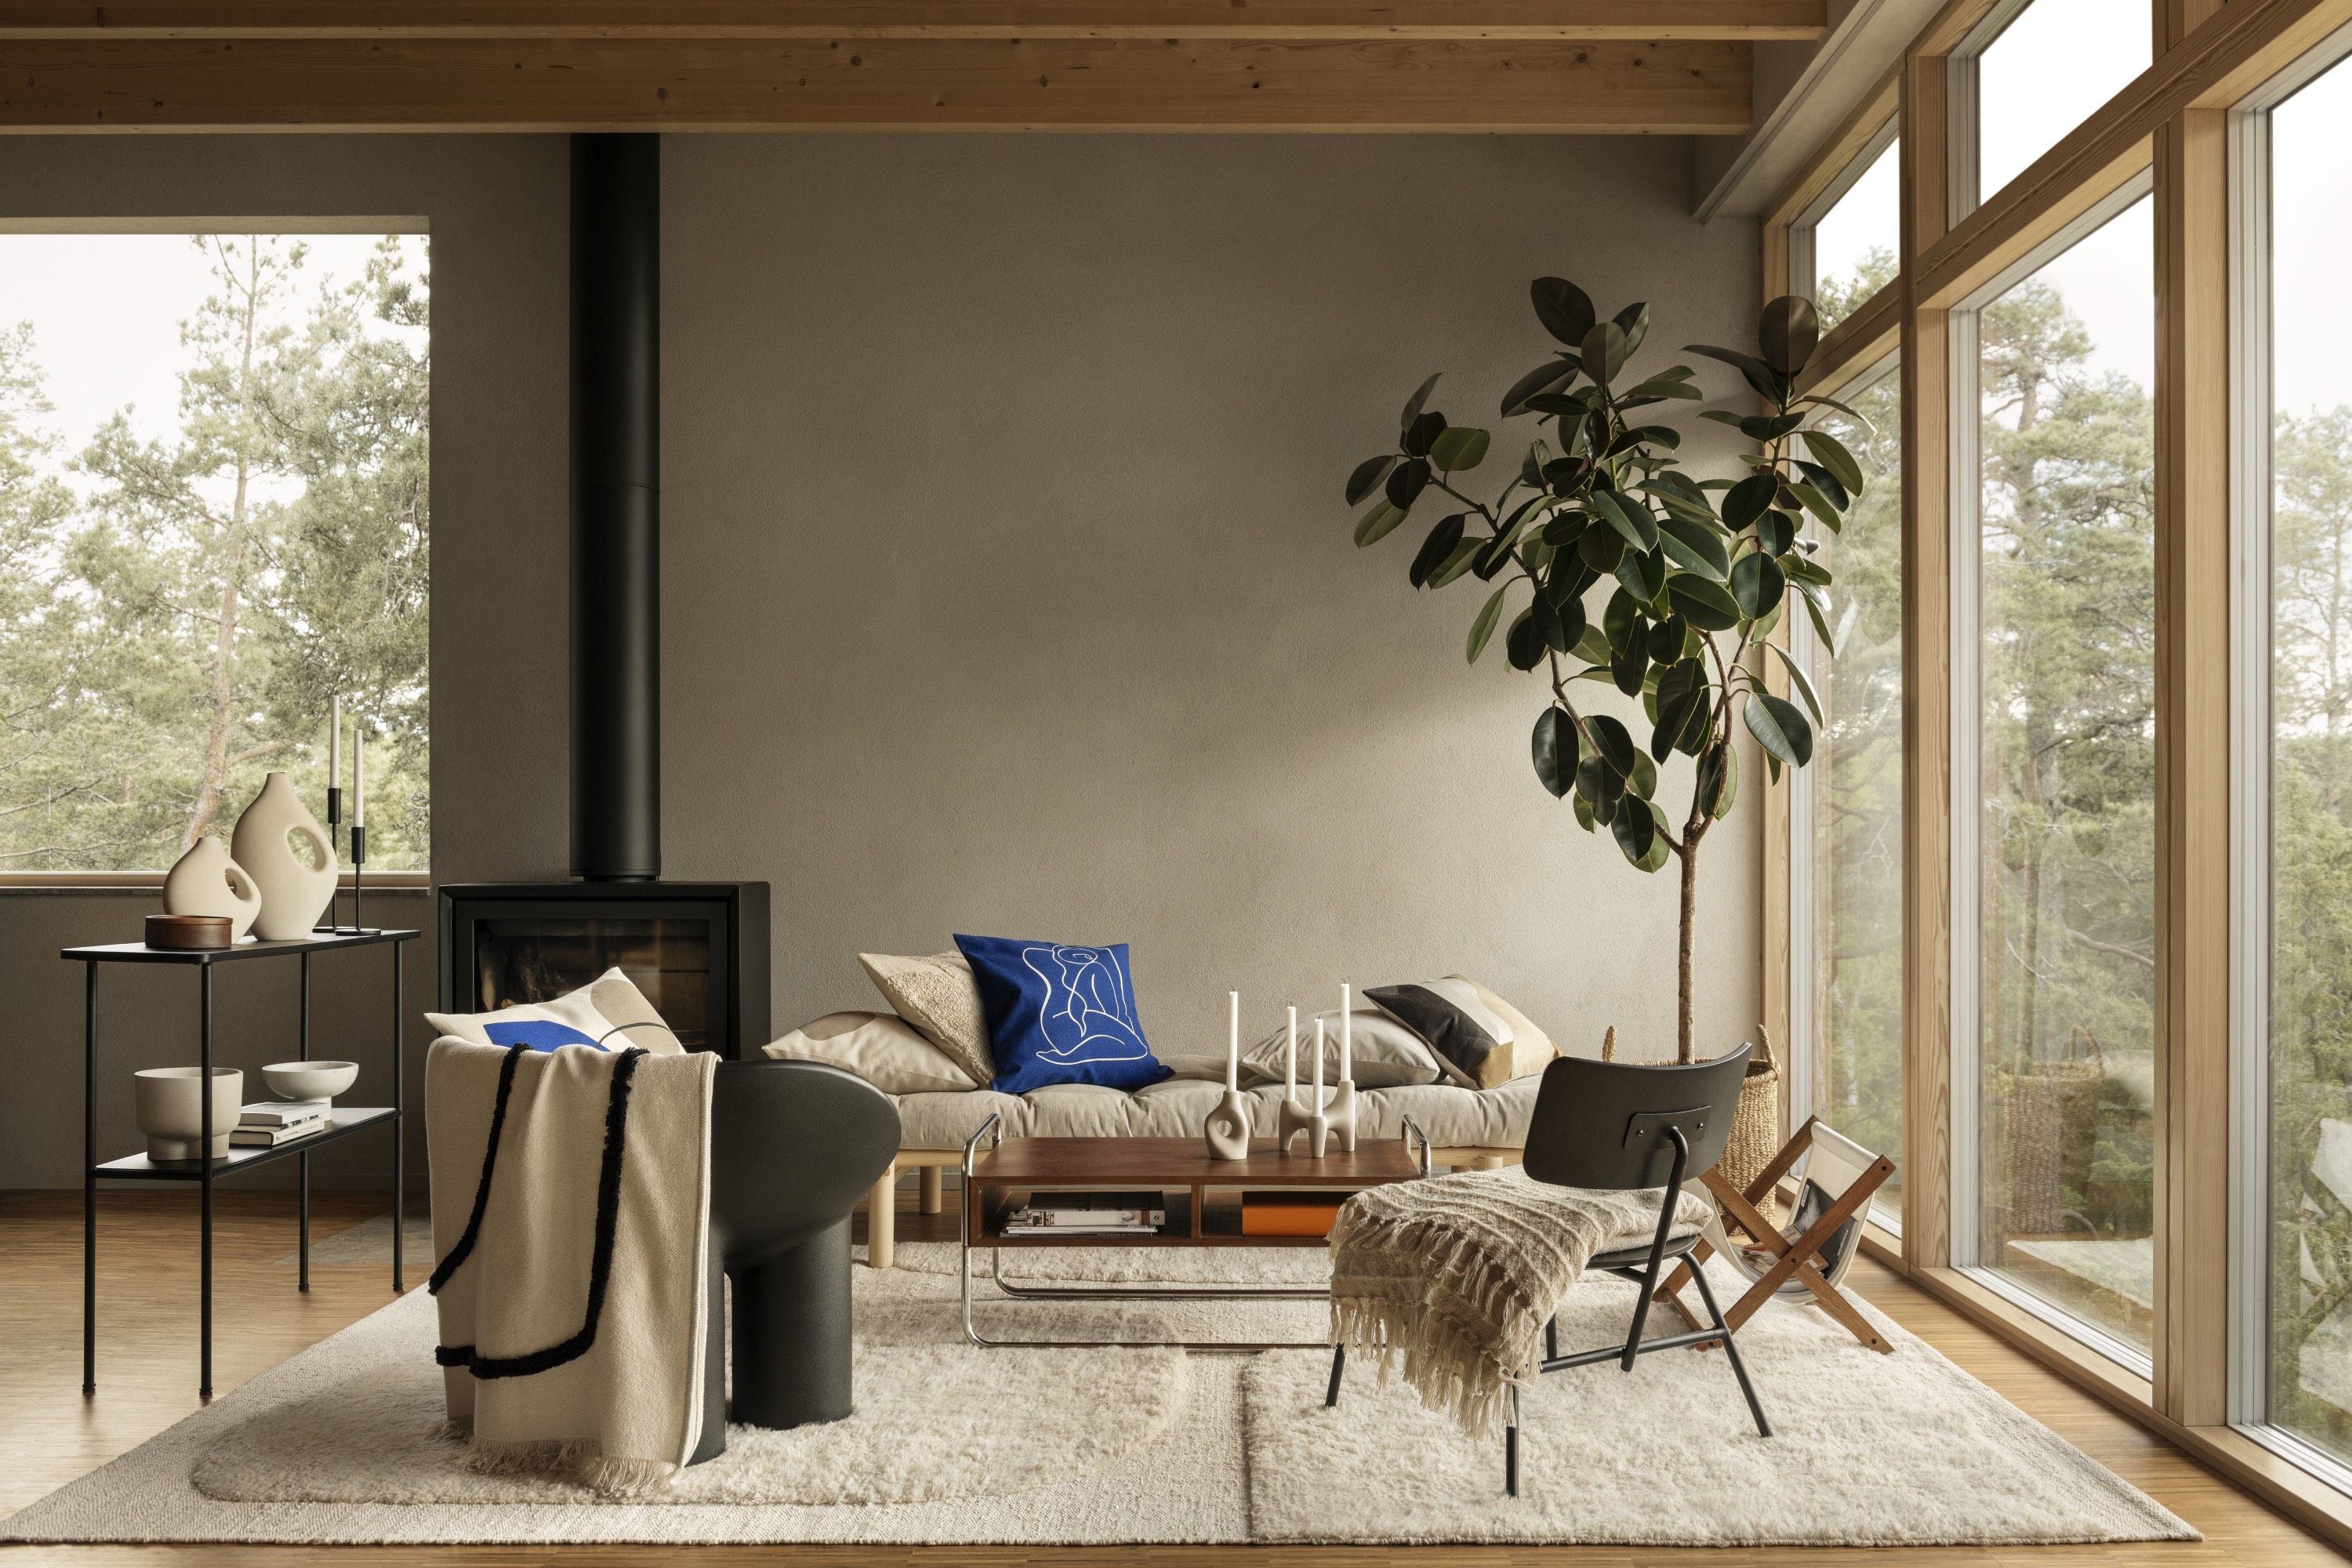 H&M HOME PRESENTS A FALL SEASON WITH INTERIOR PIECES THAT WILL MAKE YOUR  HOME COME TO LIFE